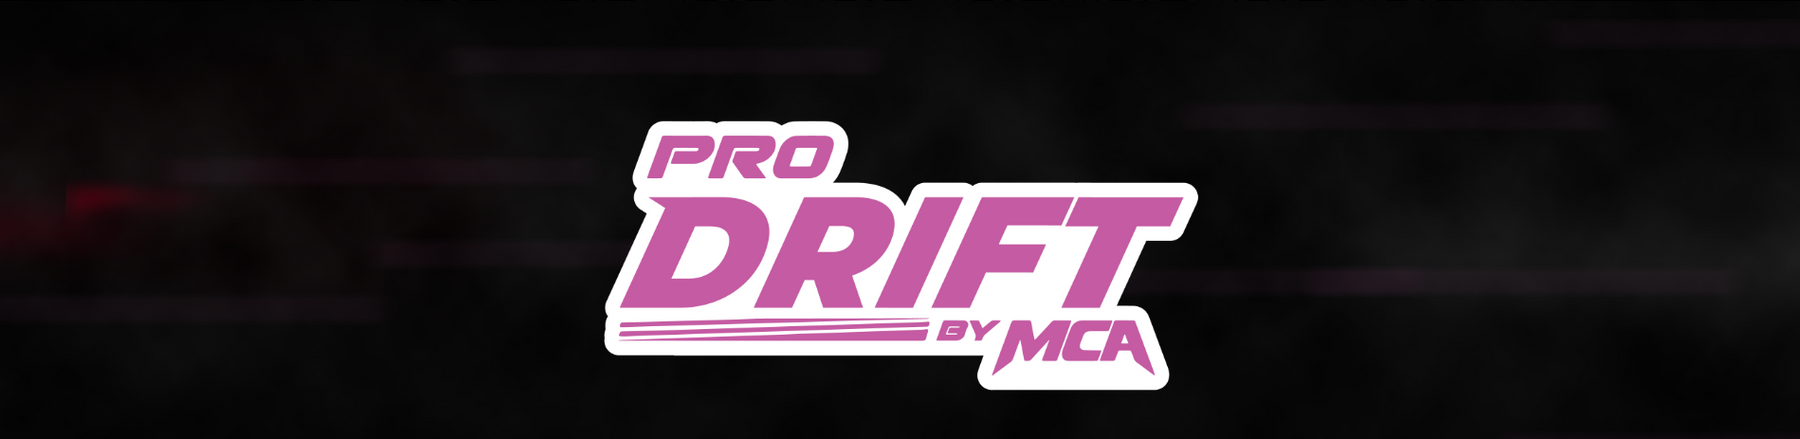 New-Product-Announcement-MCA-Pro-Drift Goleby's Parts